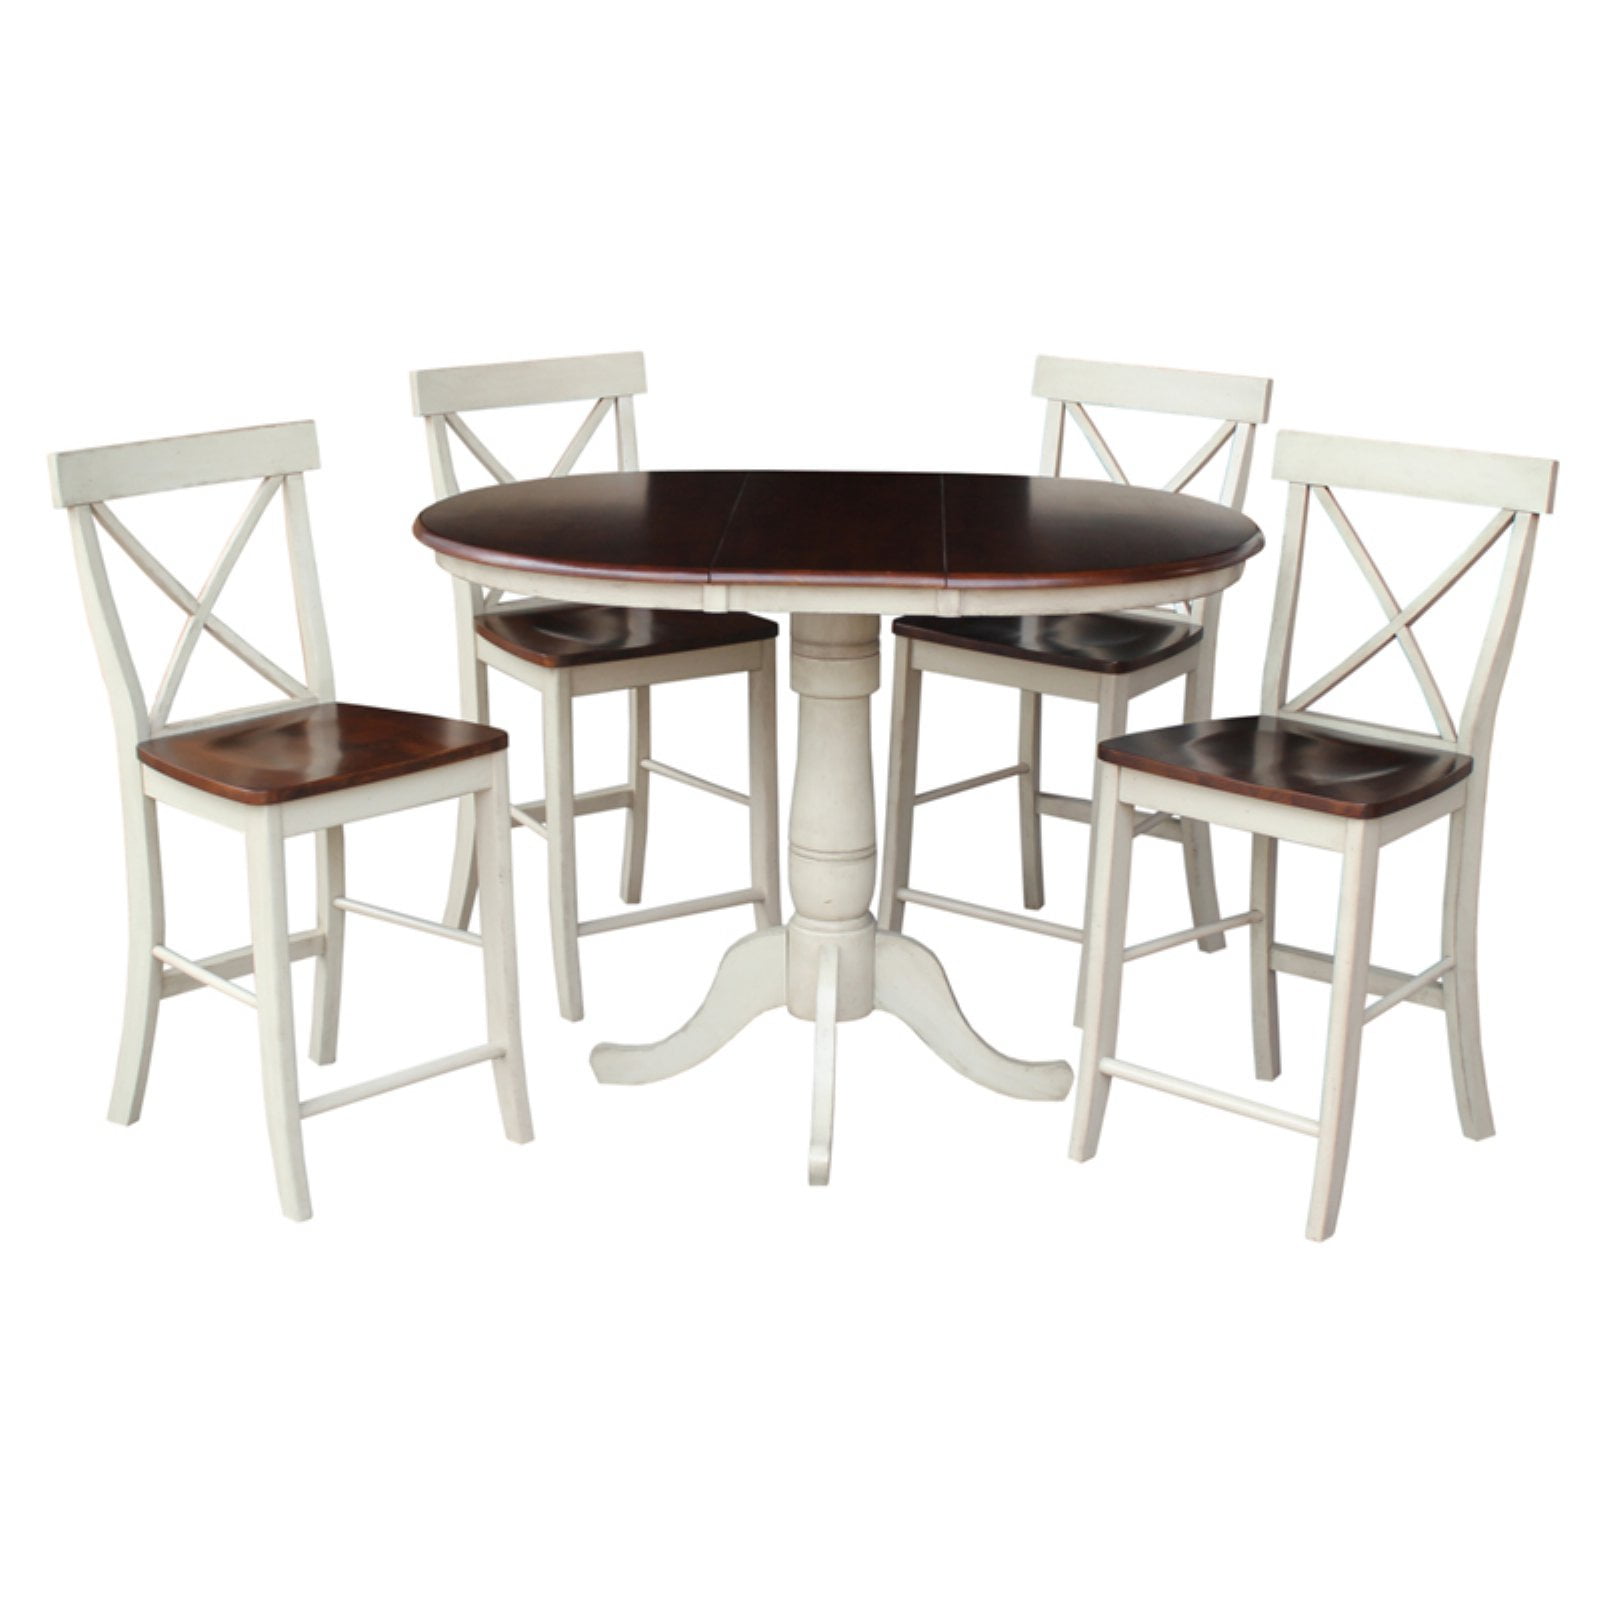 36" Round Counter Height Table with 4 X-back Stools in Antiqued Almond/Espresso - Set of 5 Promo